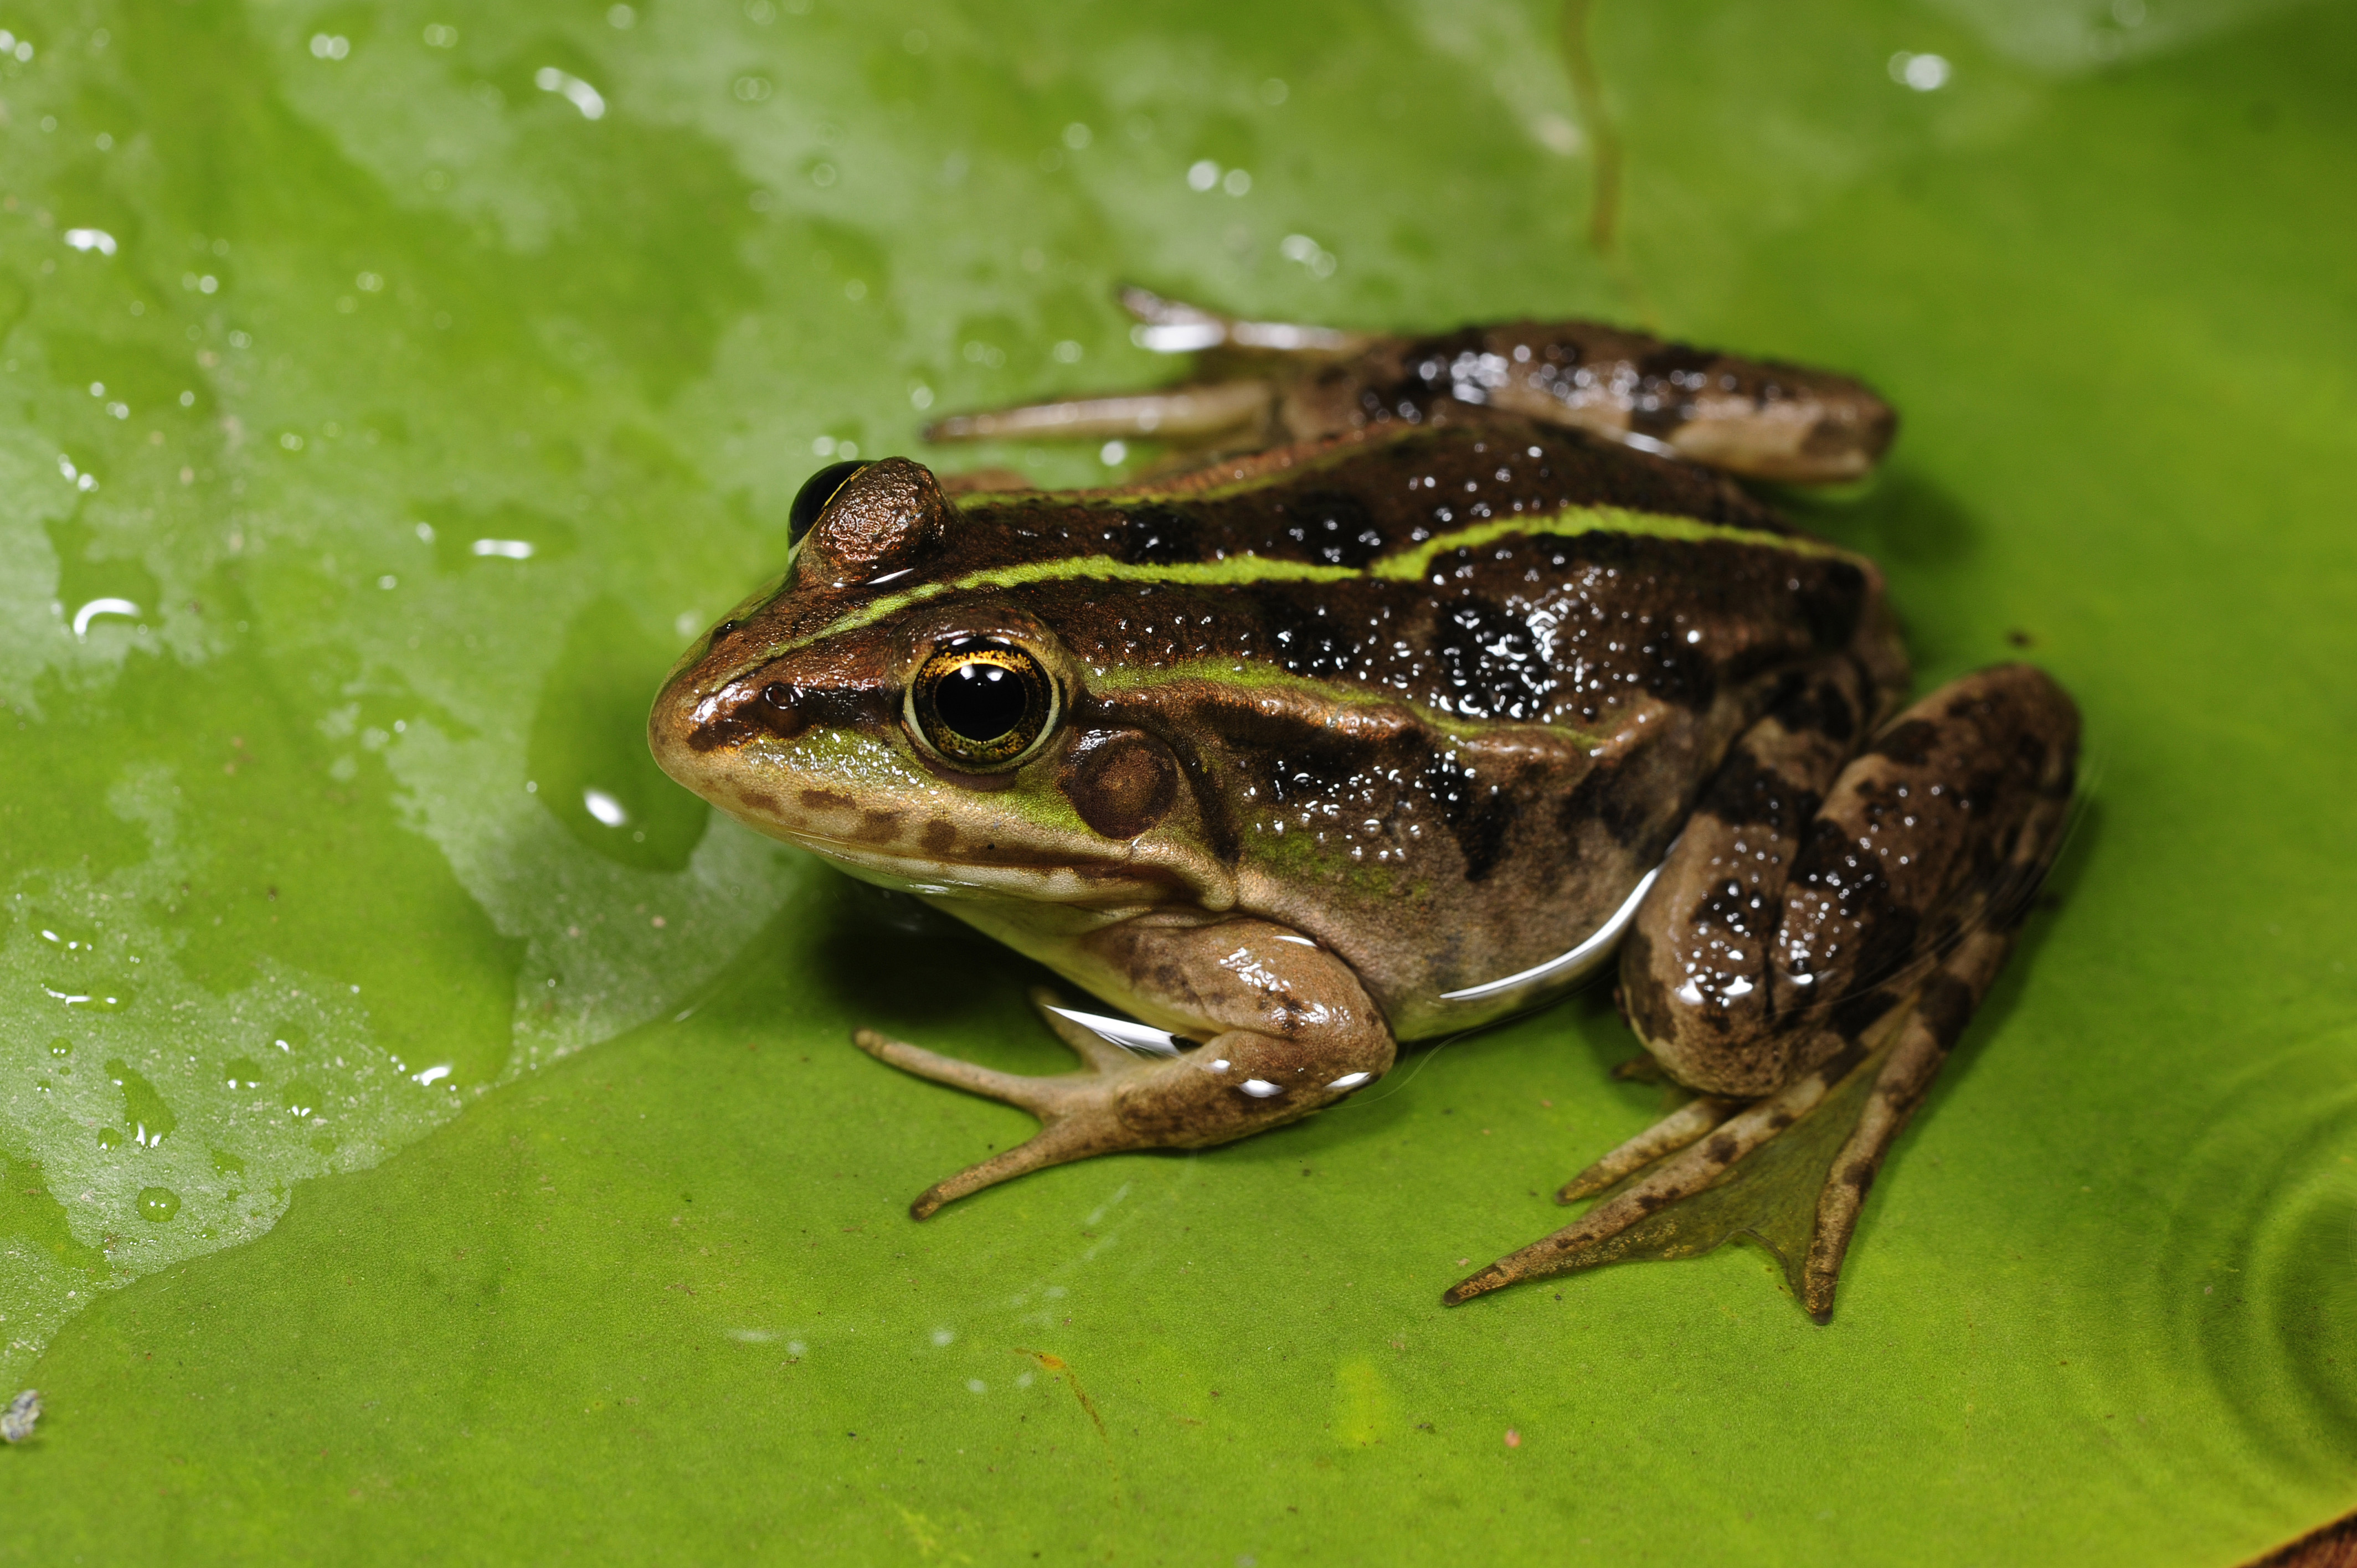 Albanian water frog (Pelophylax shqipericus); Image ONLY